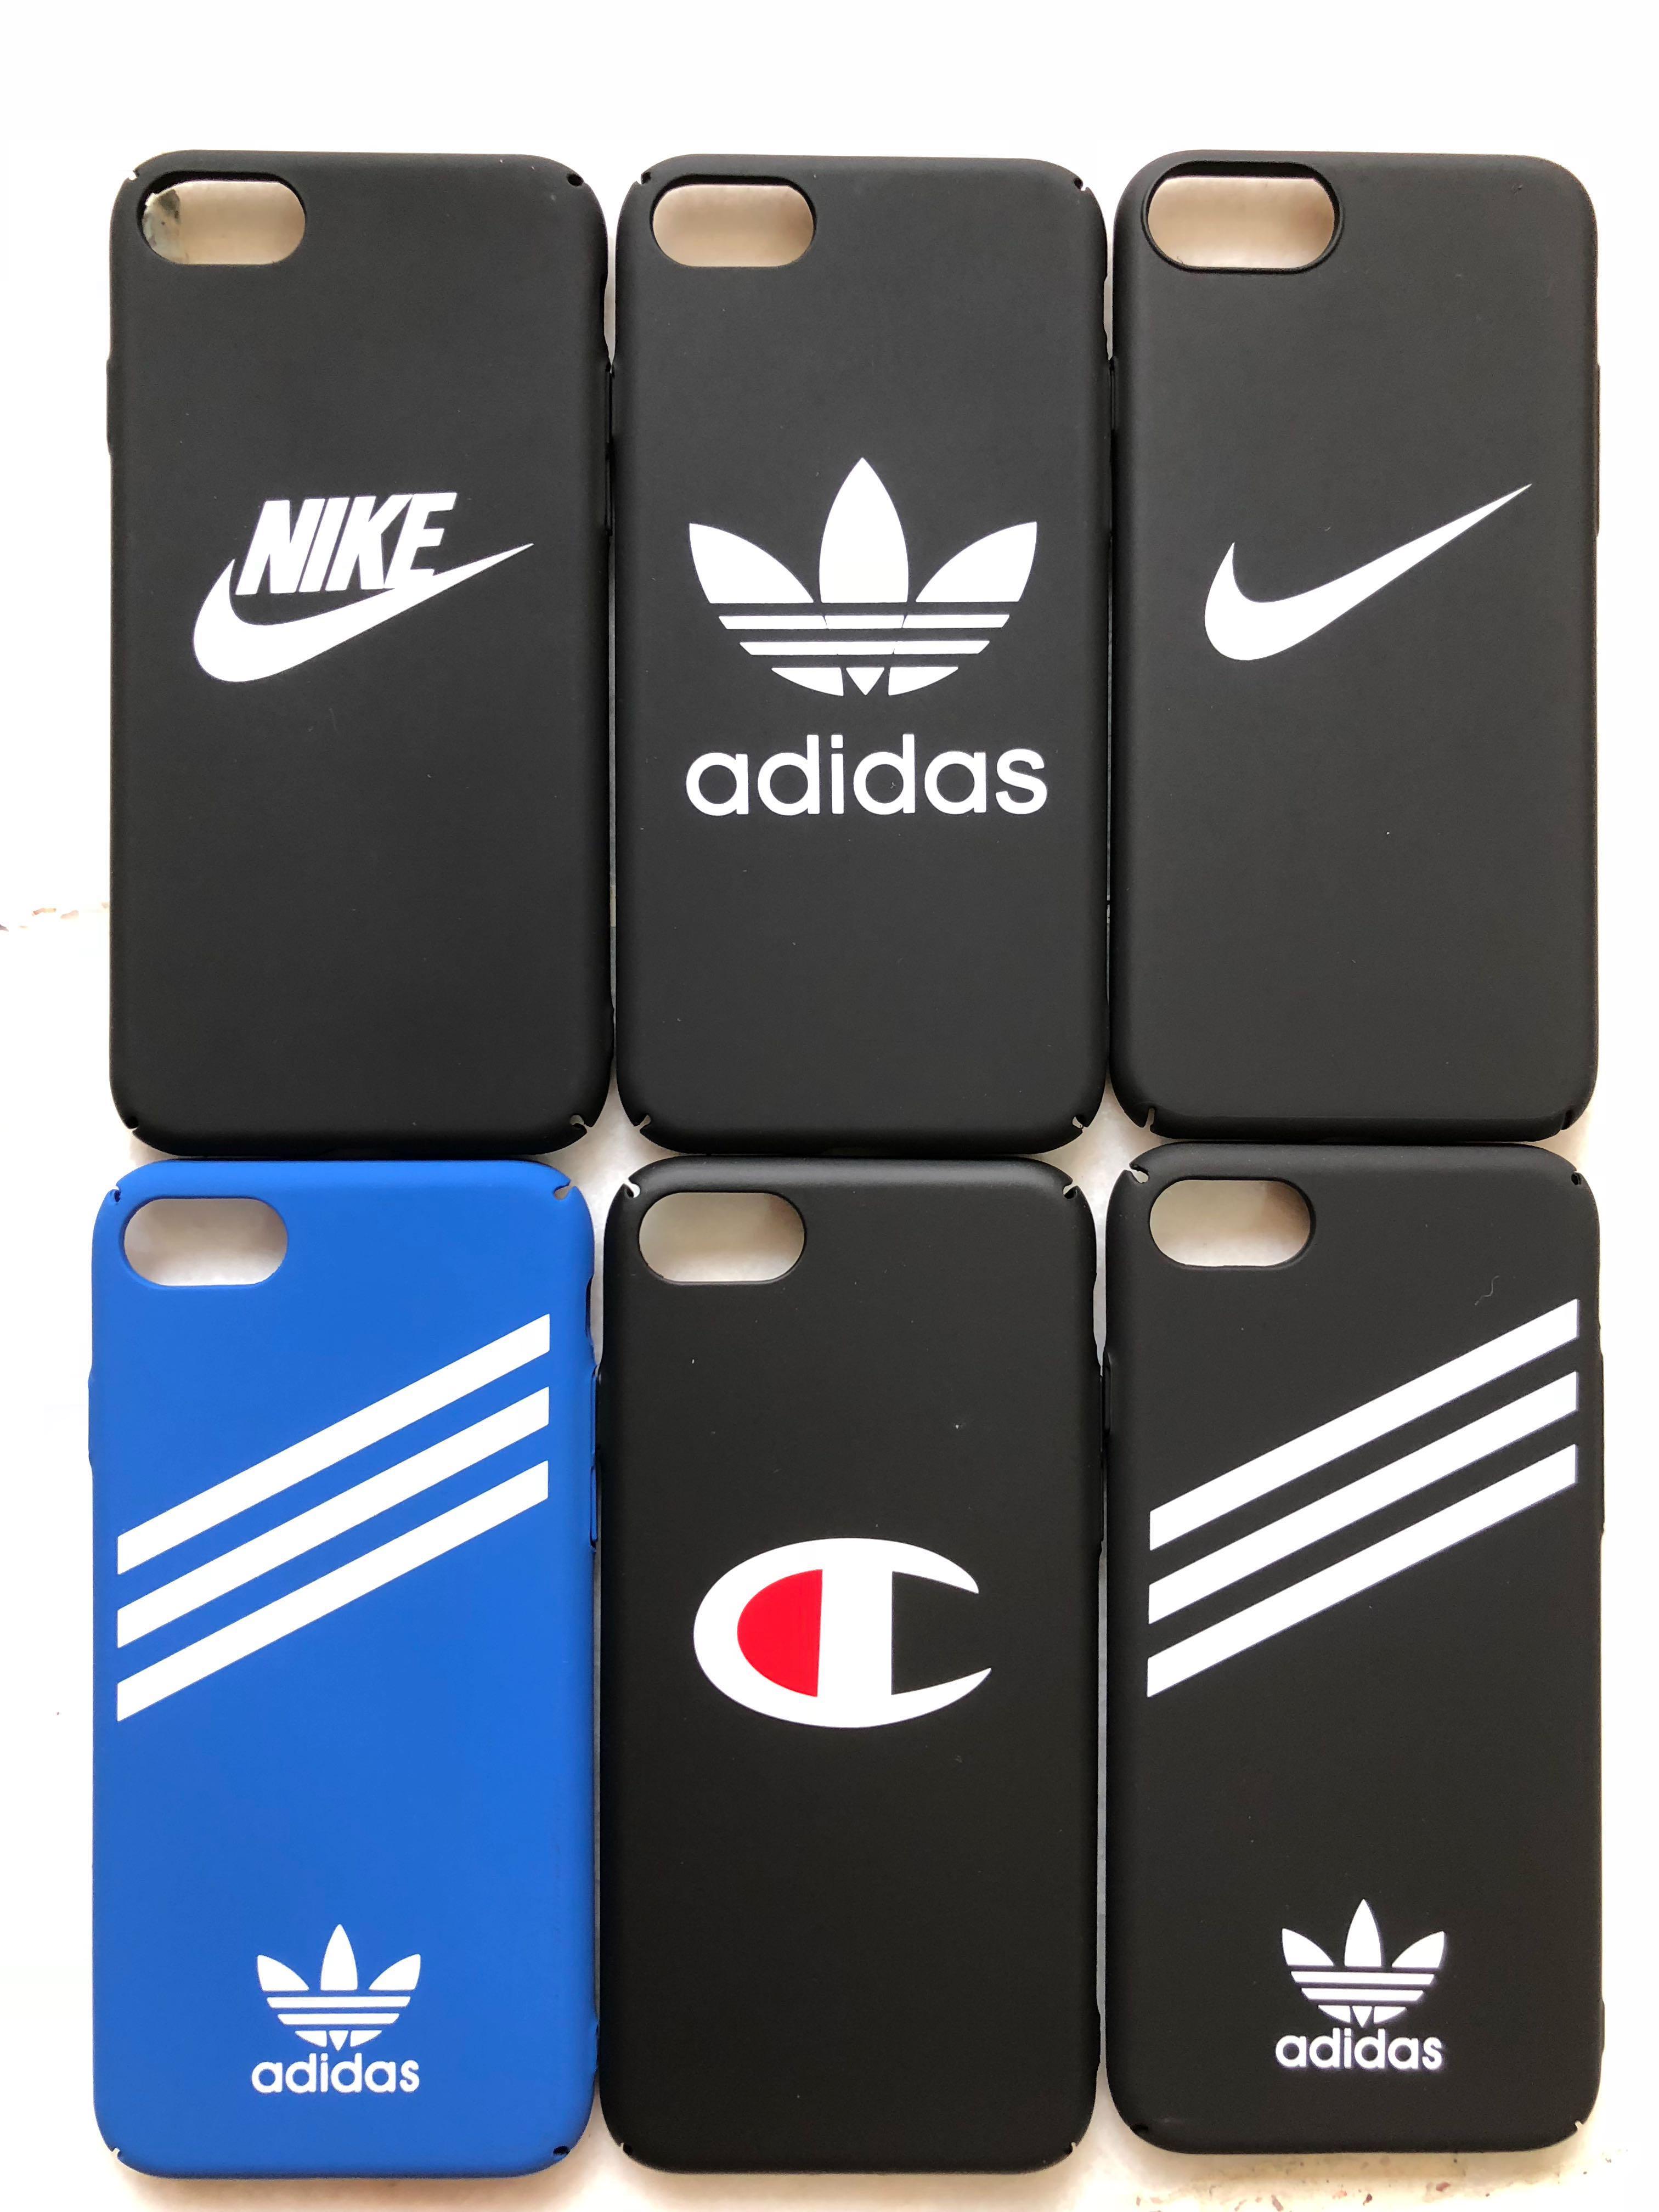 FREE📮] NIKE/ADIDAS/CHAMPION IPHONE 7/8 CASE, Mobile Phones \u0026 Tablets,  Mobile \u0026 Tablet Accessories, Cases \u0026 Sleeves on Carousell